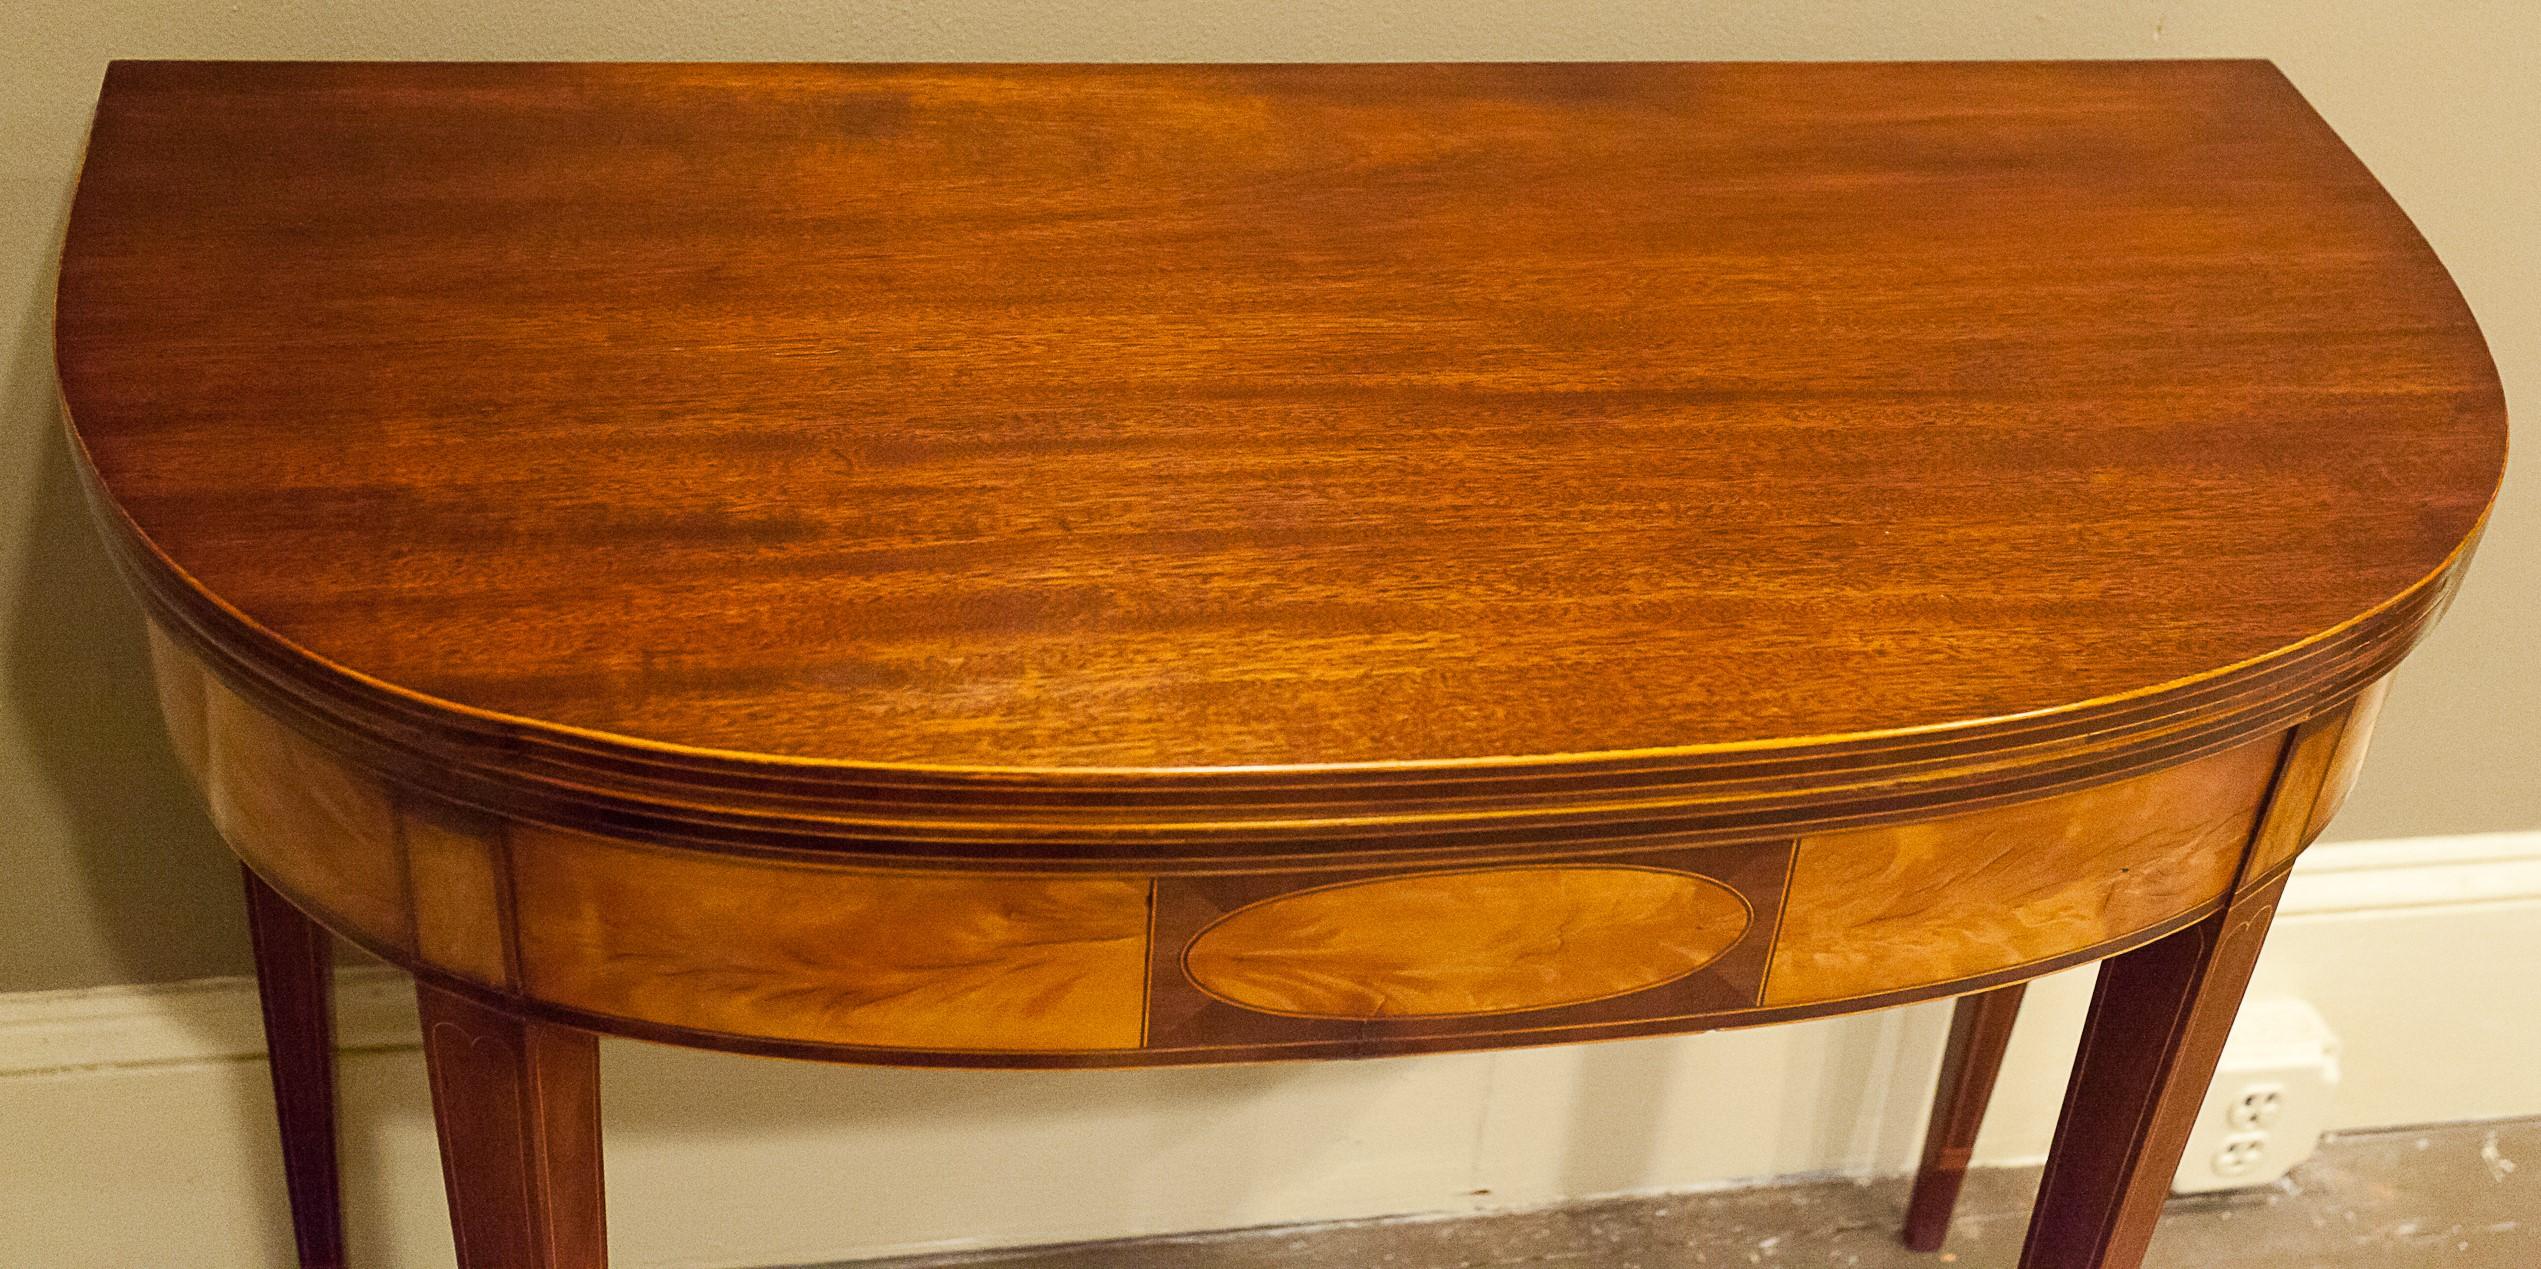 Federal Hepplewhite Gate Leg Card Table, New England, circa 1790 In Excellent Condition For Sale In Alexandria, VA